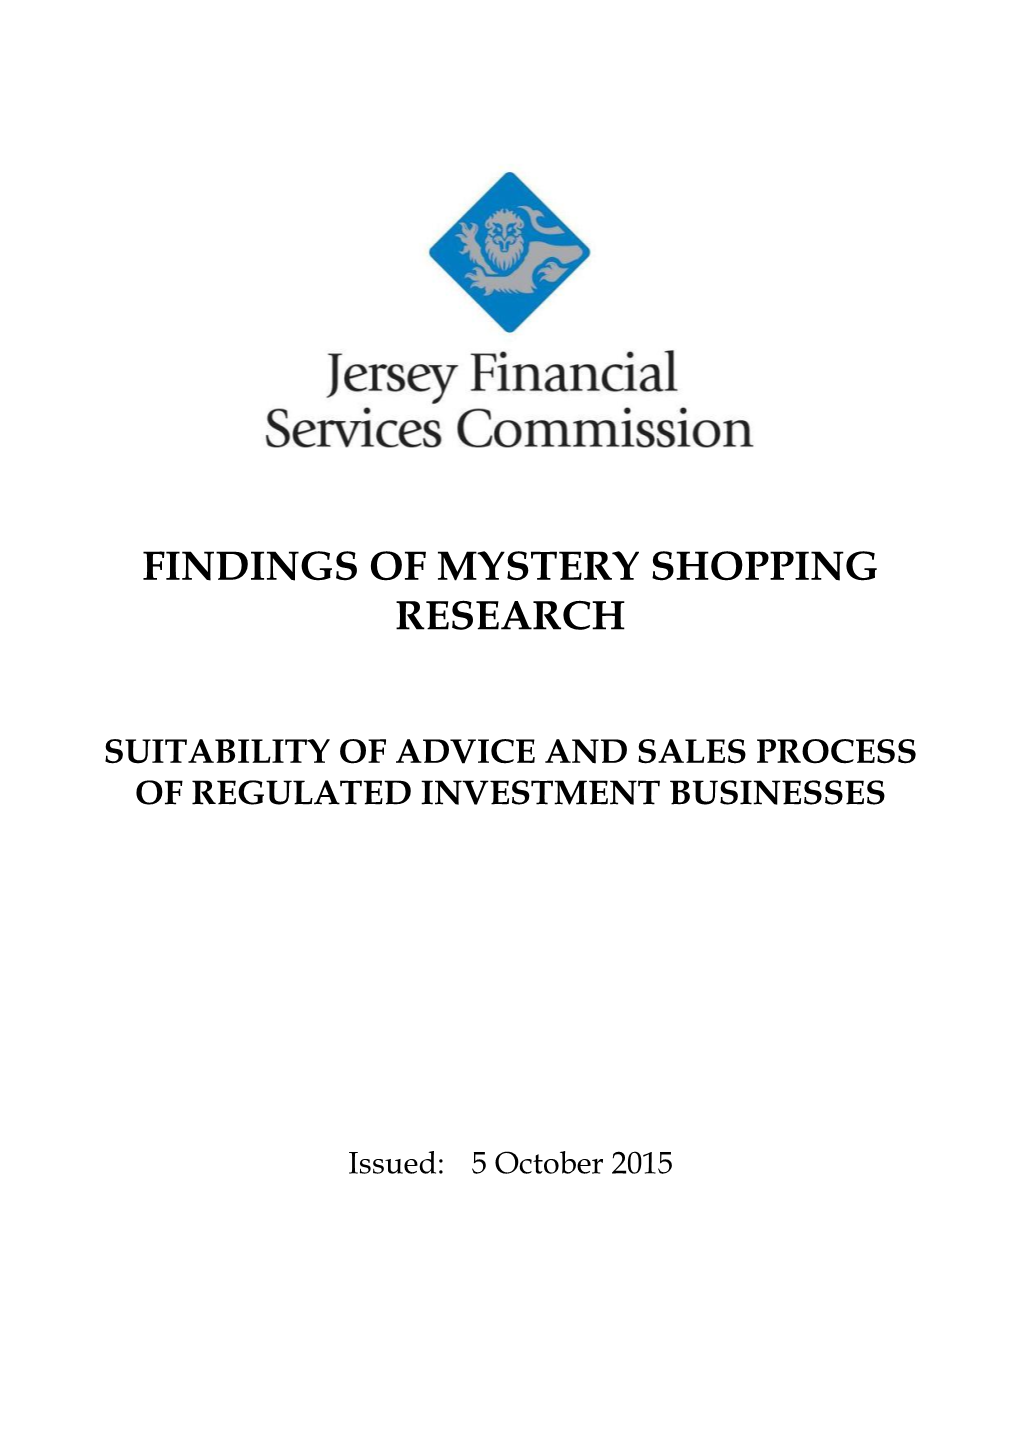 Findings of Mystery Shopping Research